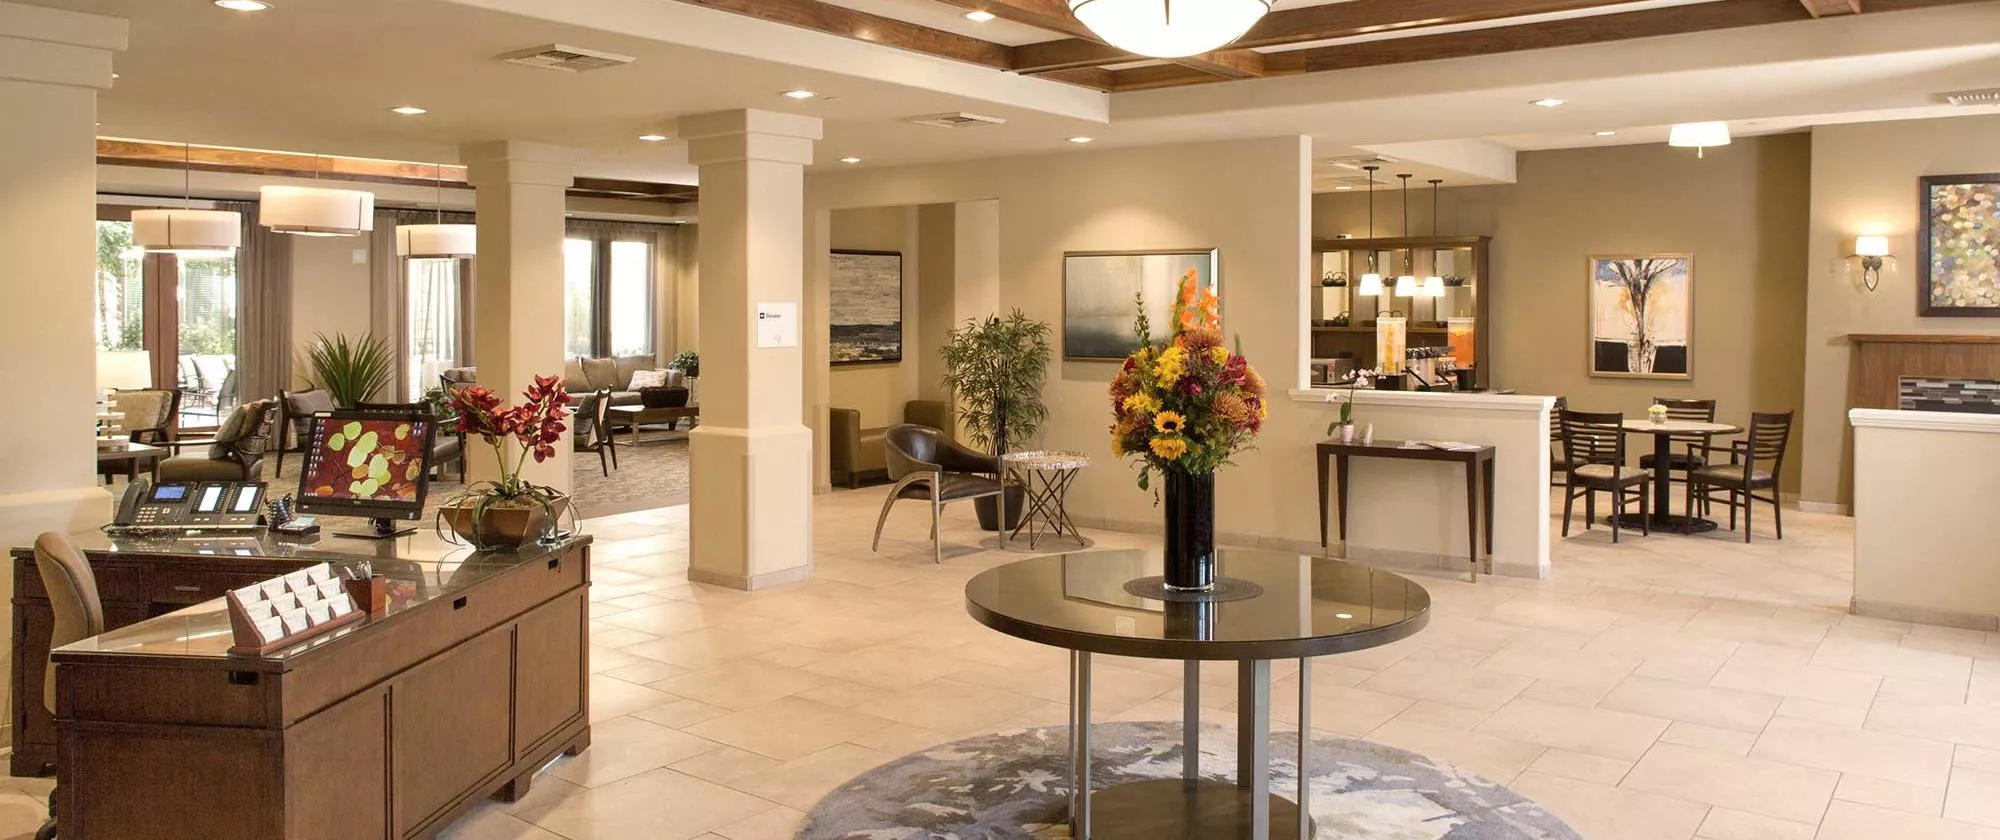 San Jose entry hall with reception desk and a table with flowers